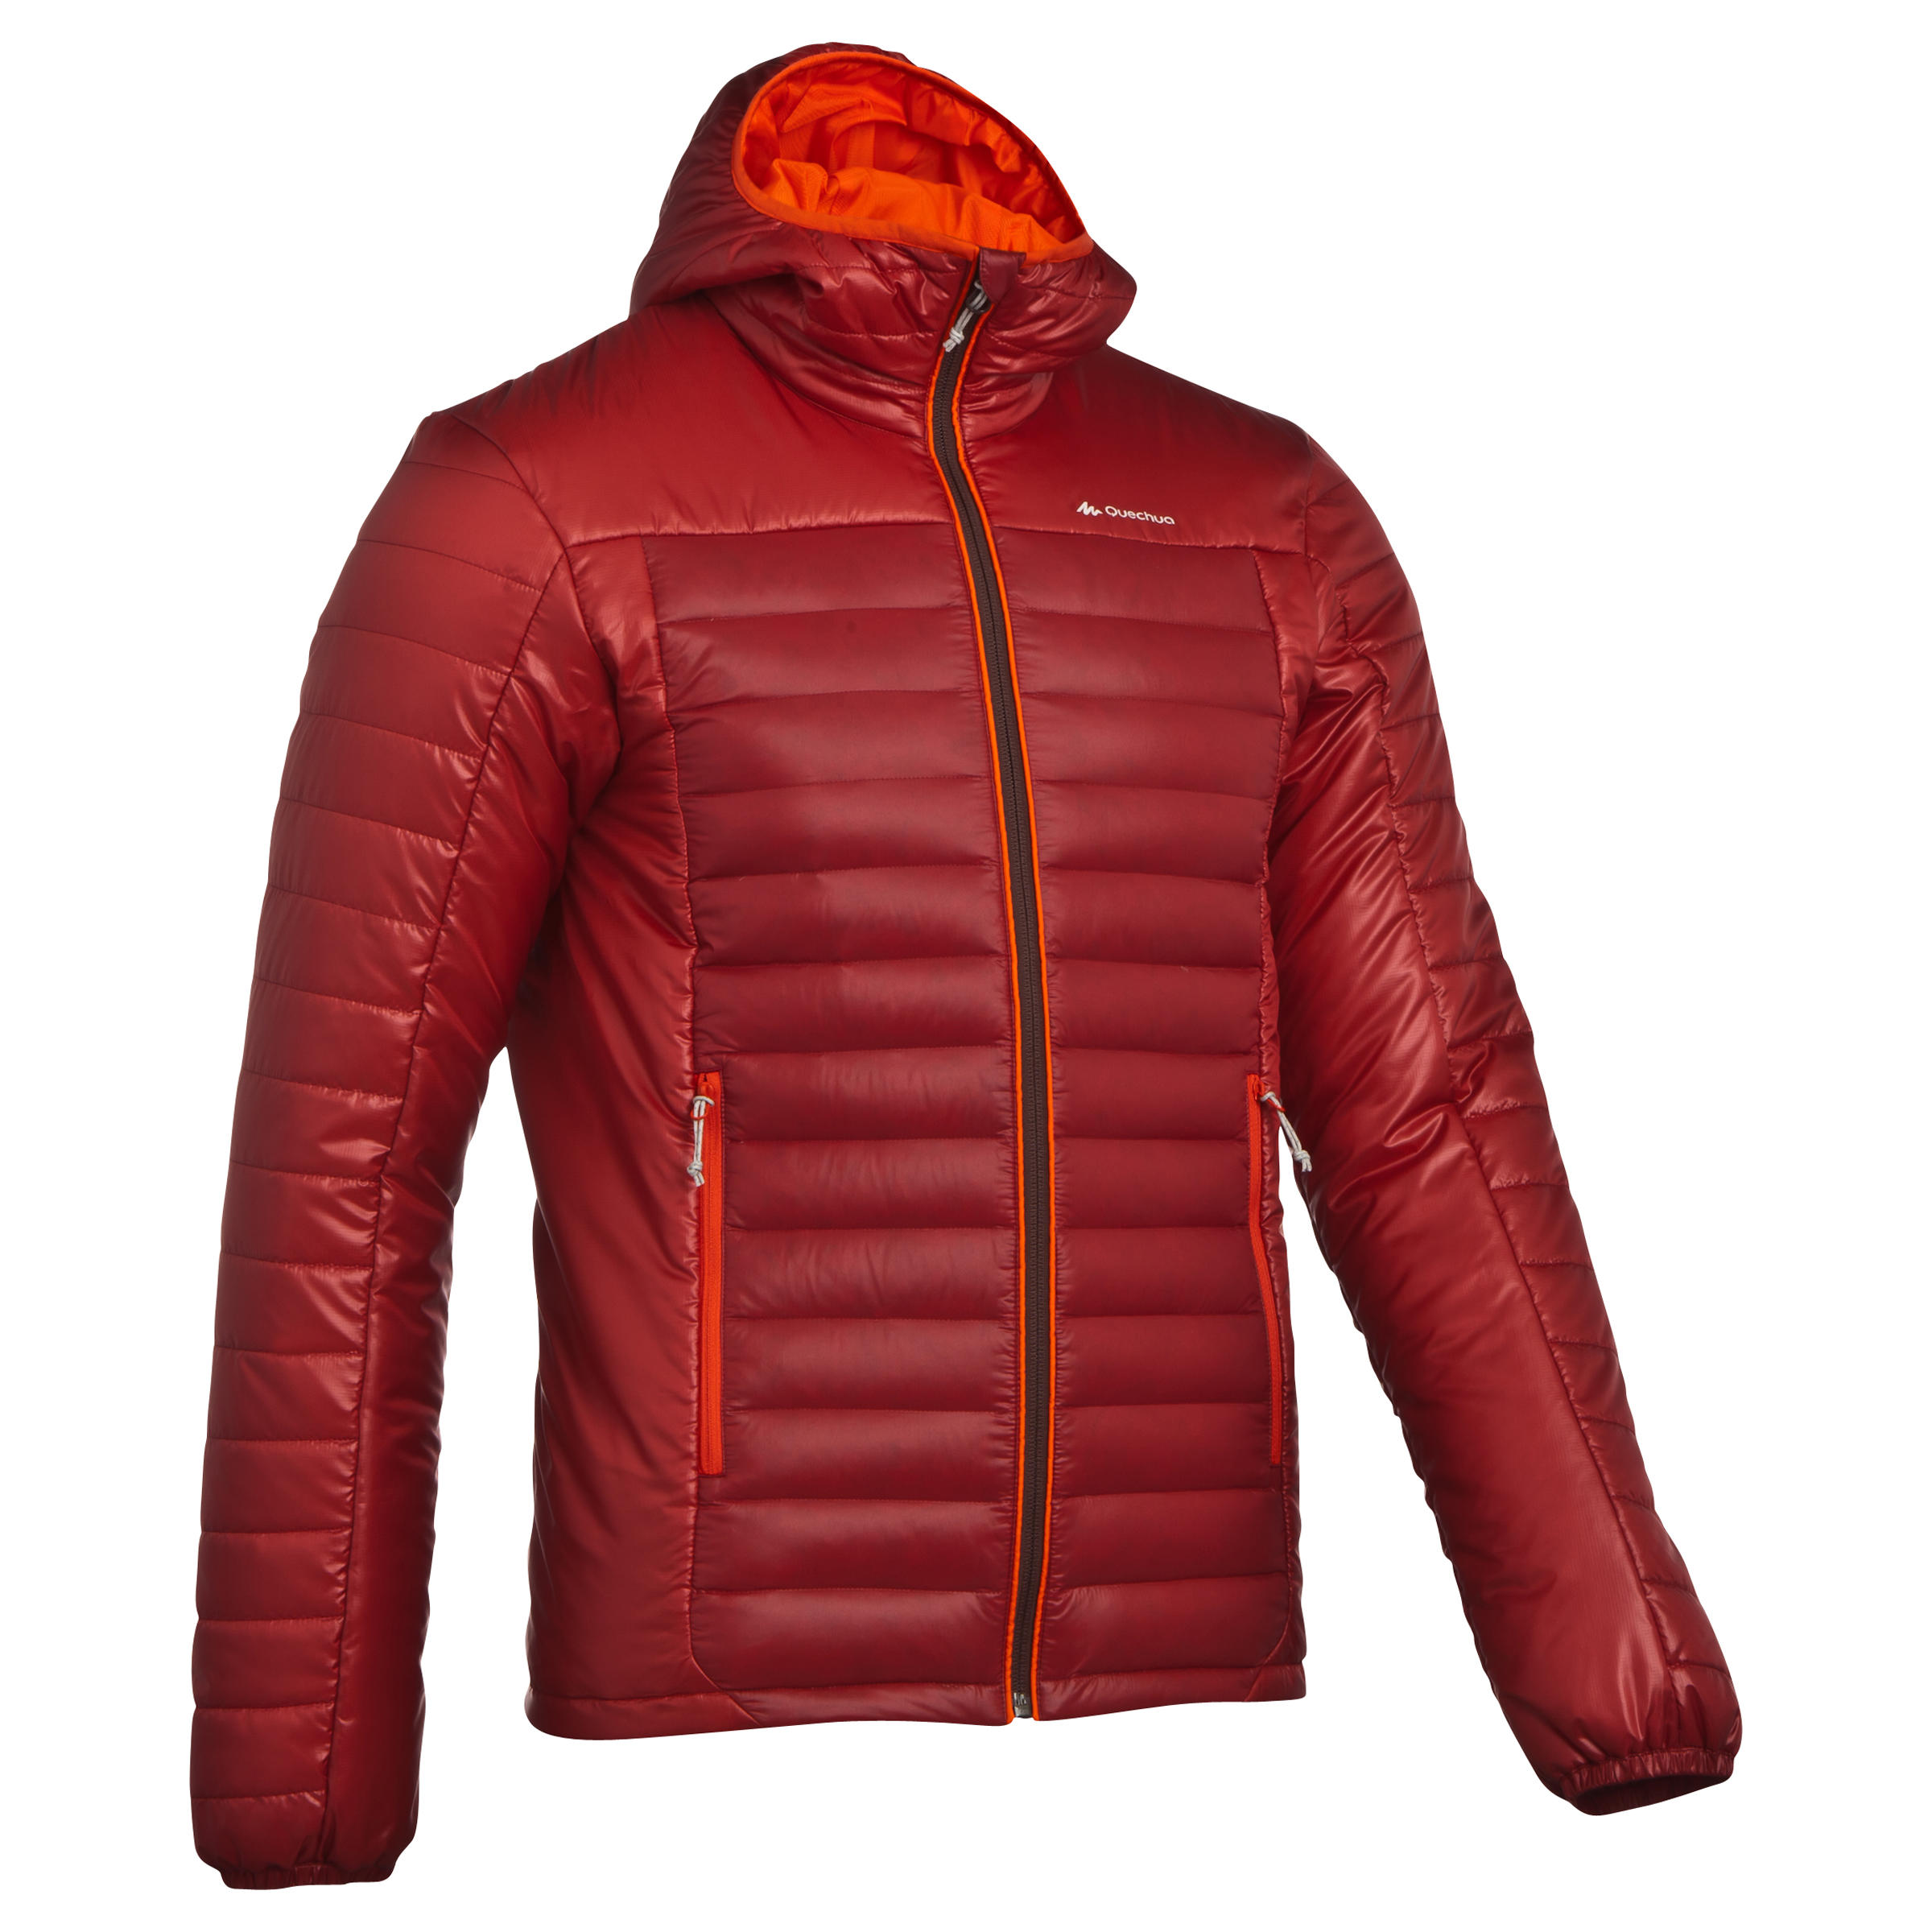 QUECHUA X-Light men's quilted hiking jacket red